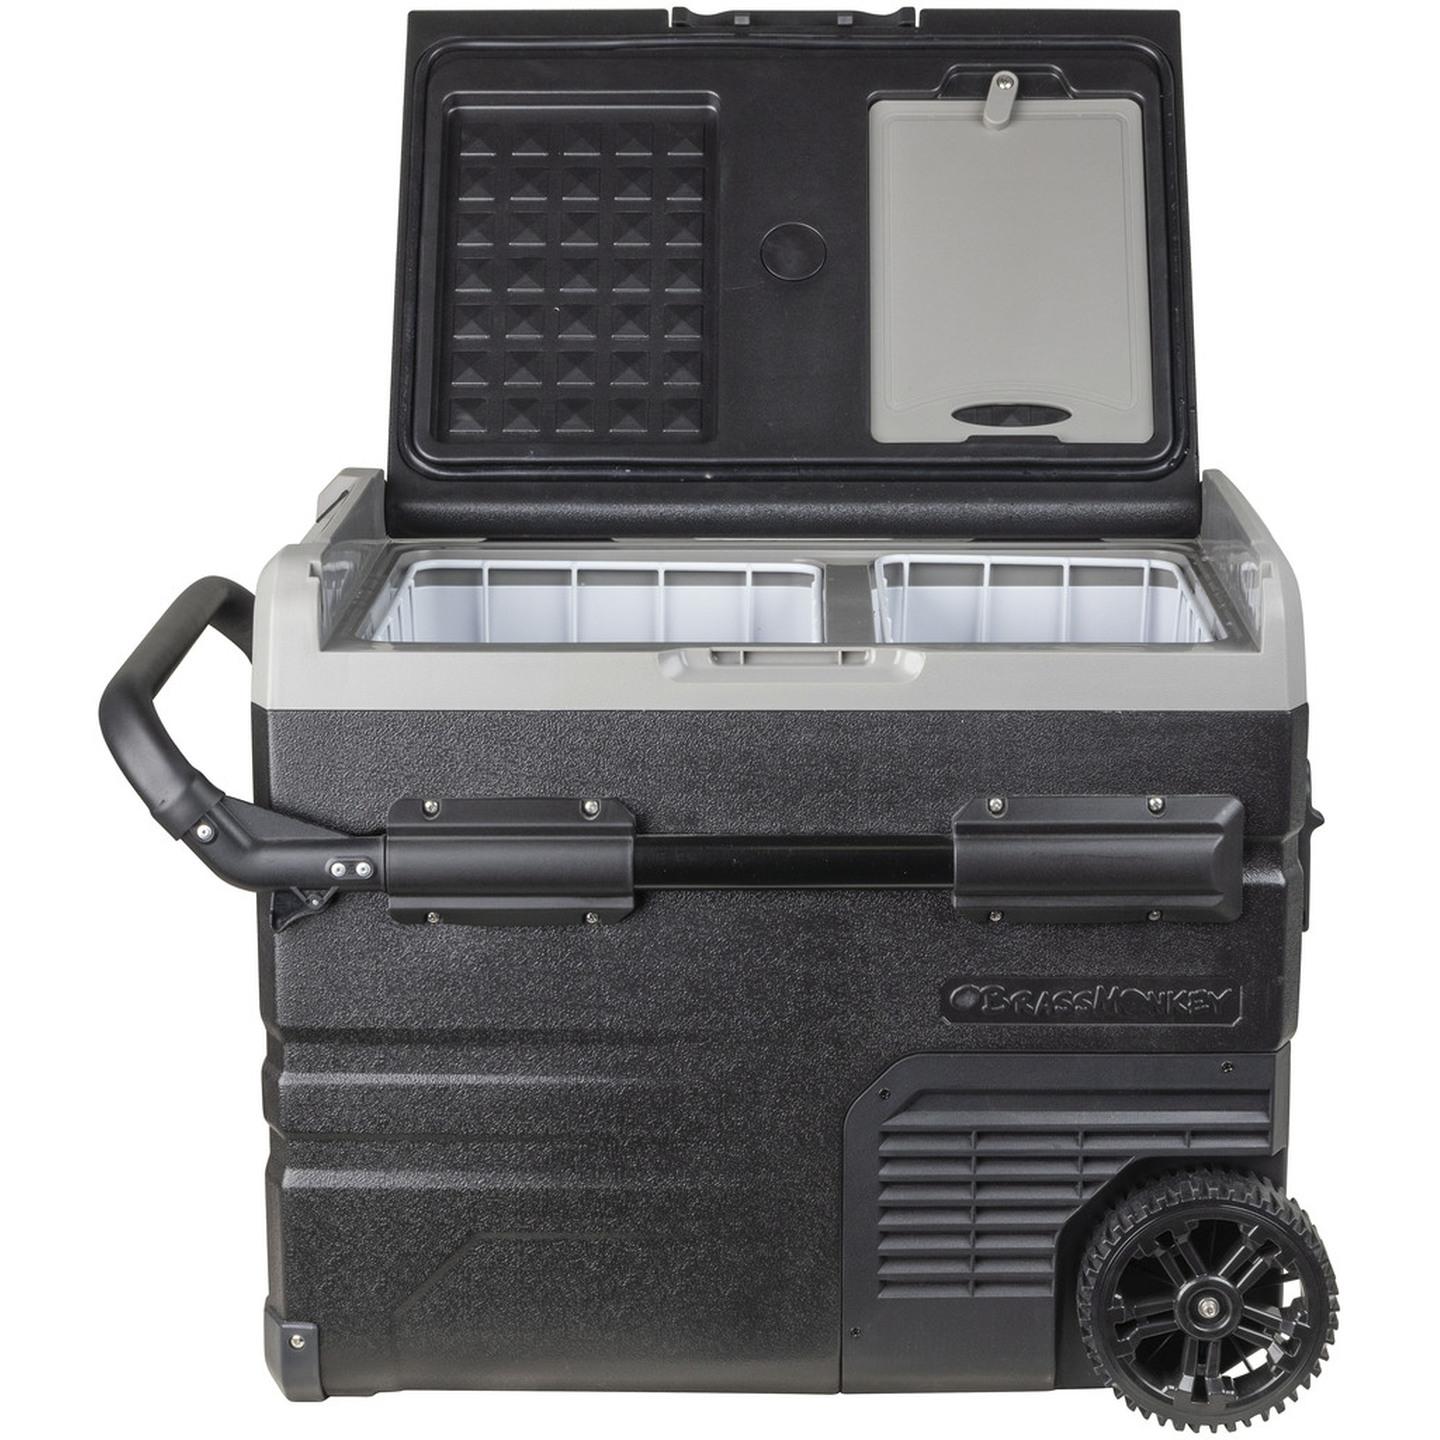 45L Brass Monkey Portable Dual Zone Fridge/Freezer with Wheels and Battery Compartment